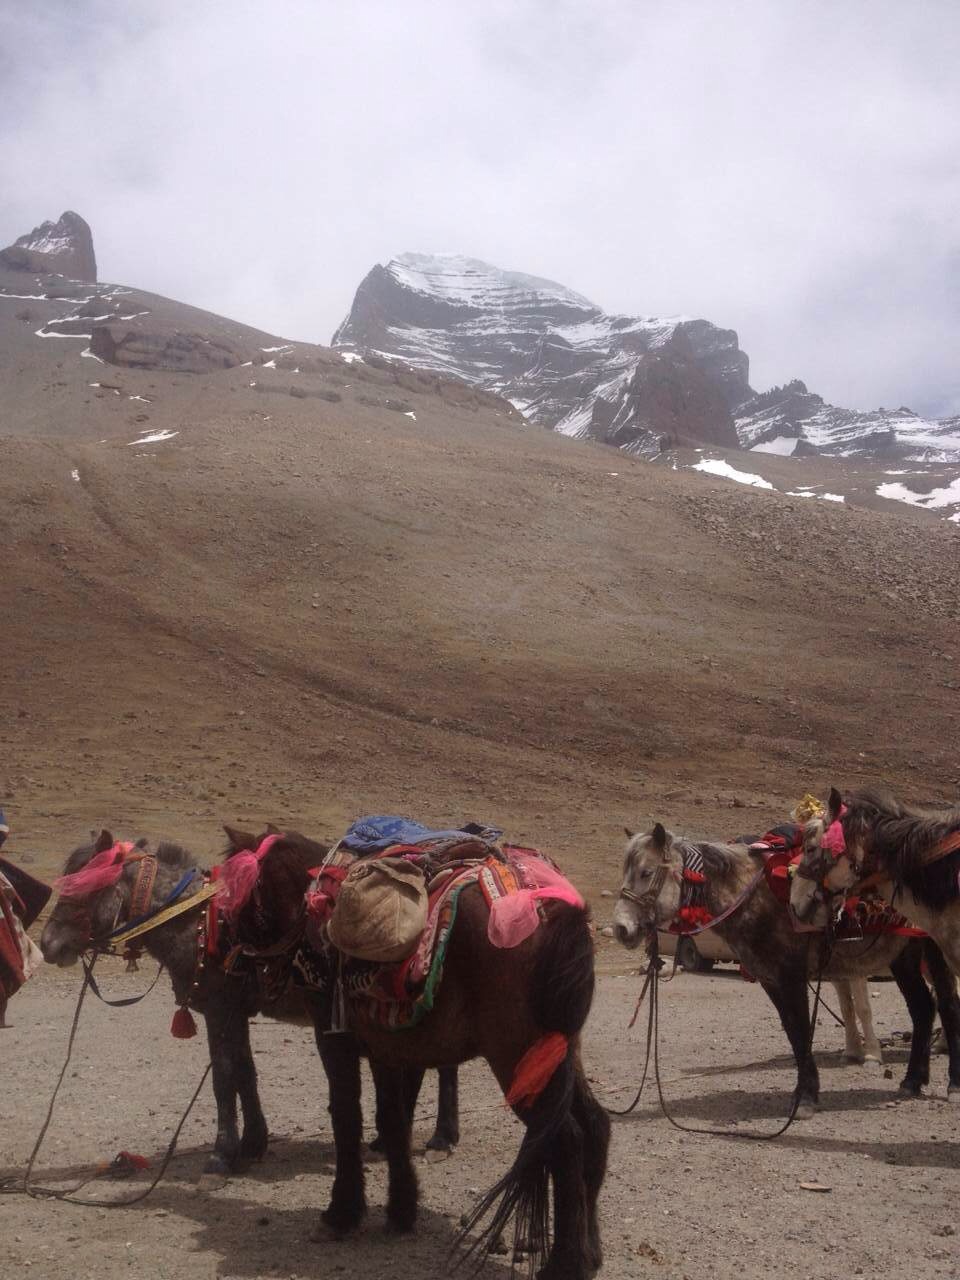 They use some horses to hold their packages because it's really a long way to trek around this holy mountain.